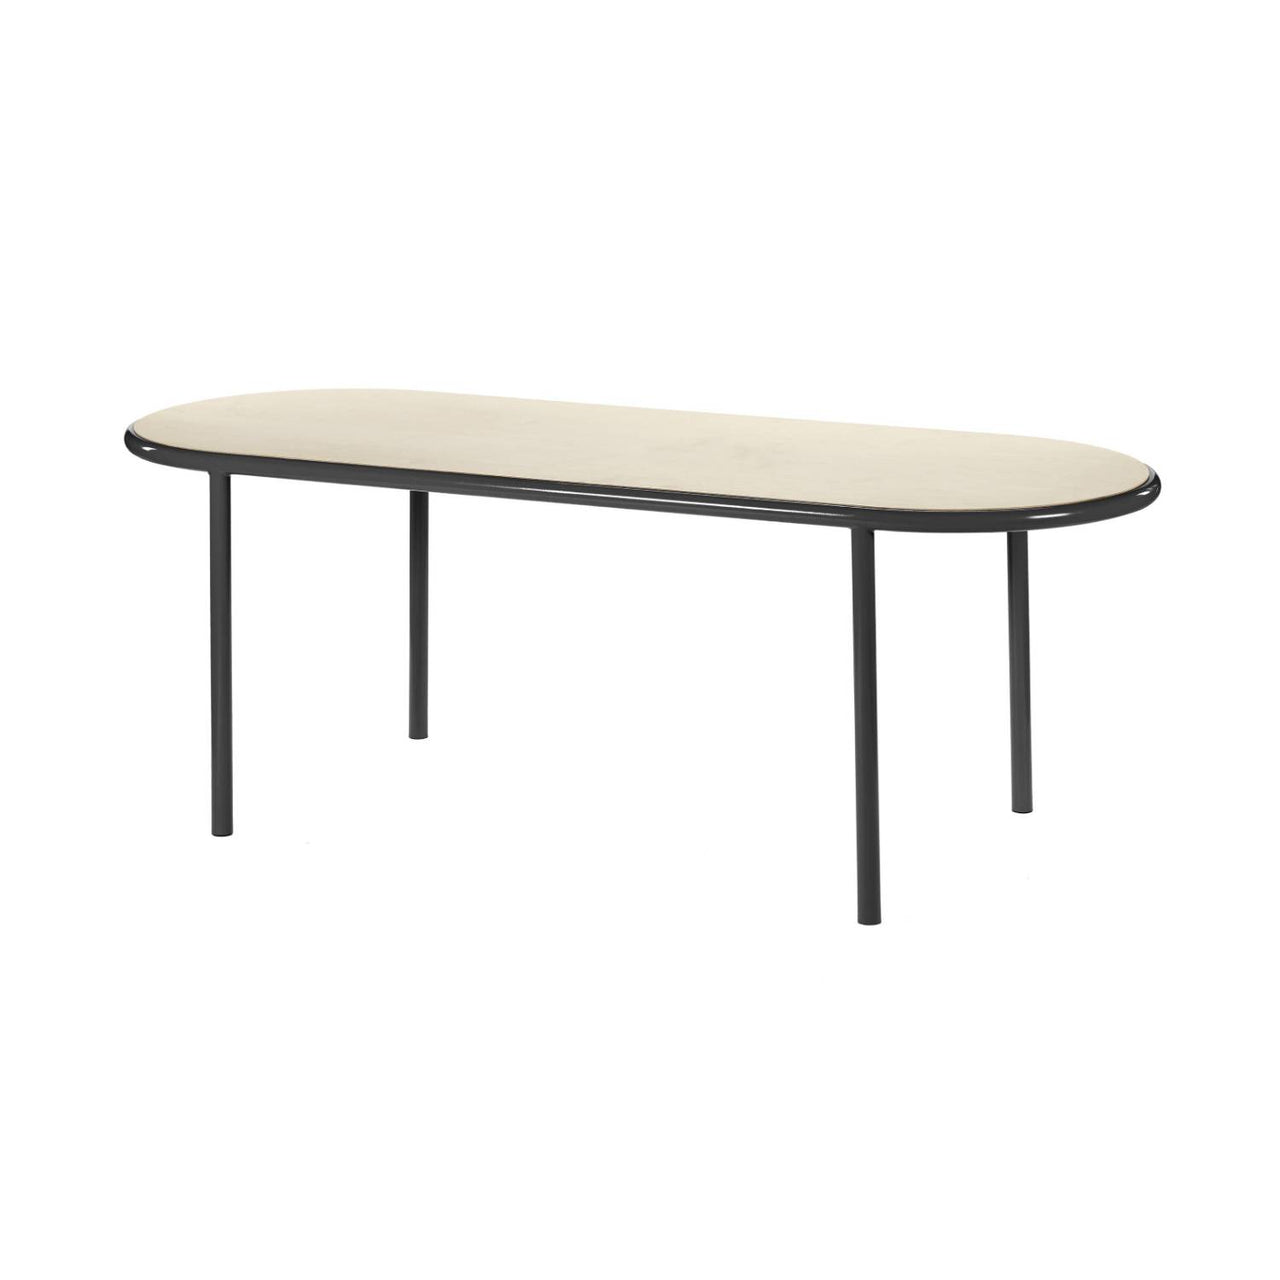 Wooden Table: Oval + Birch + Black